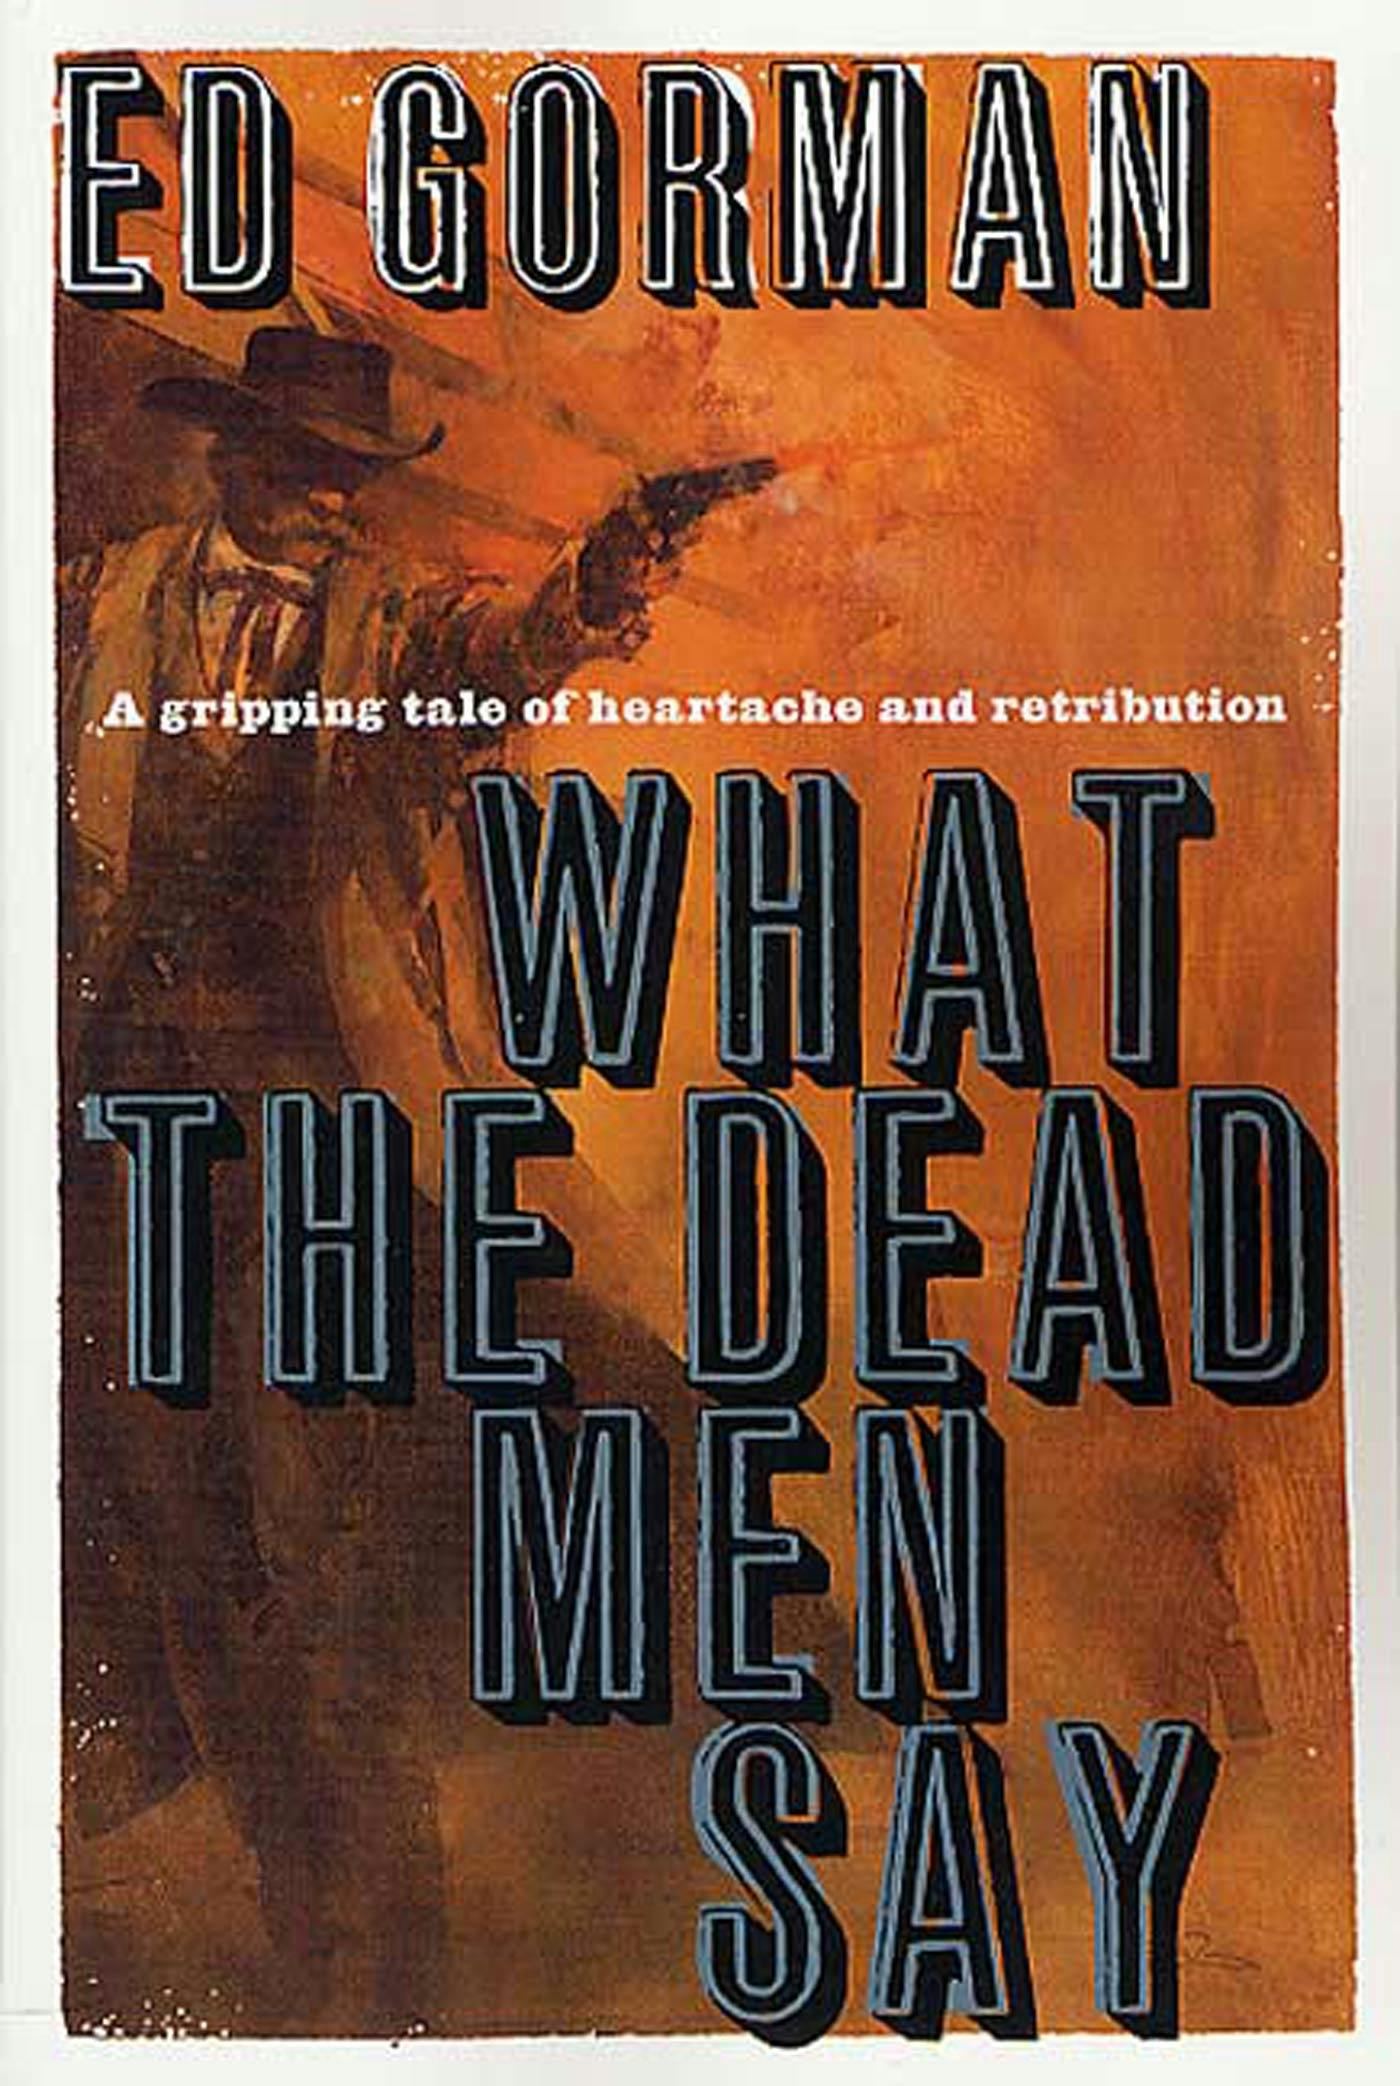 Cover for the book titled as: What The Dead Men Say